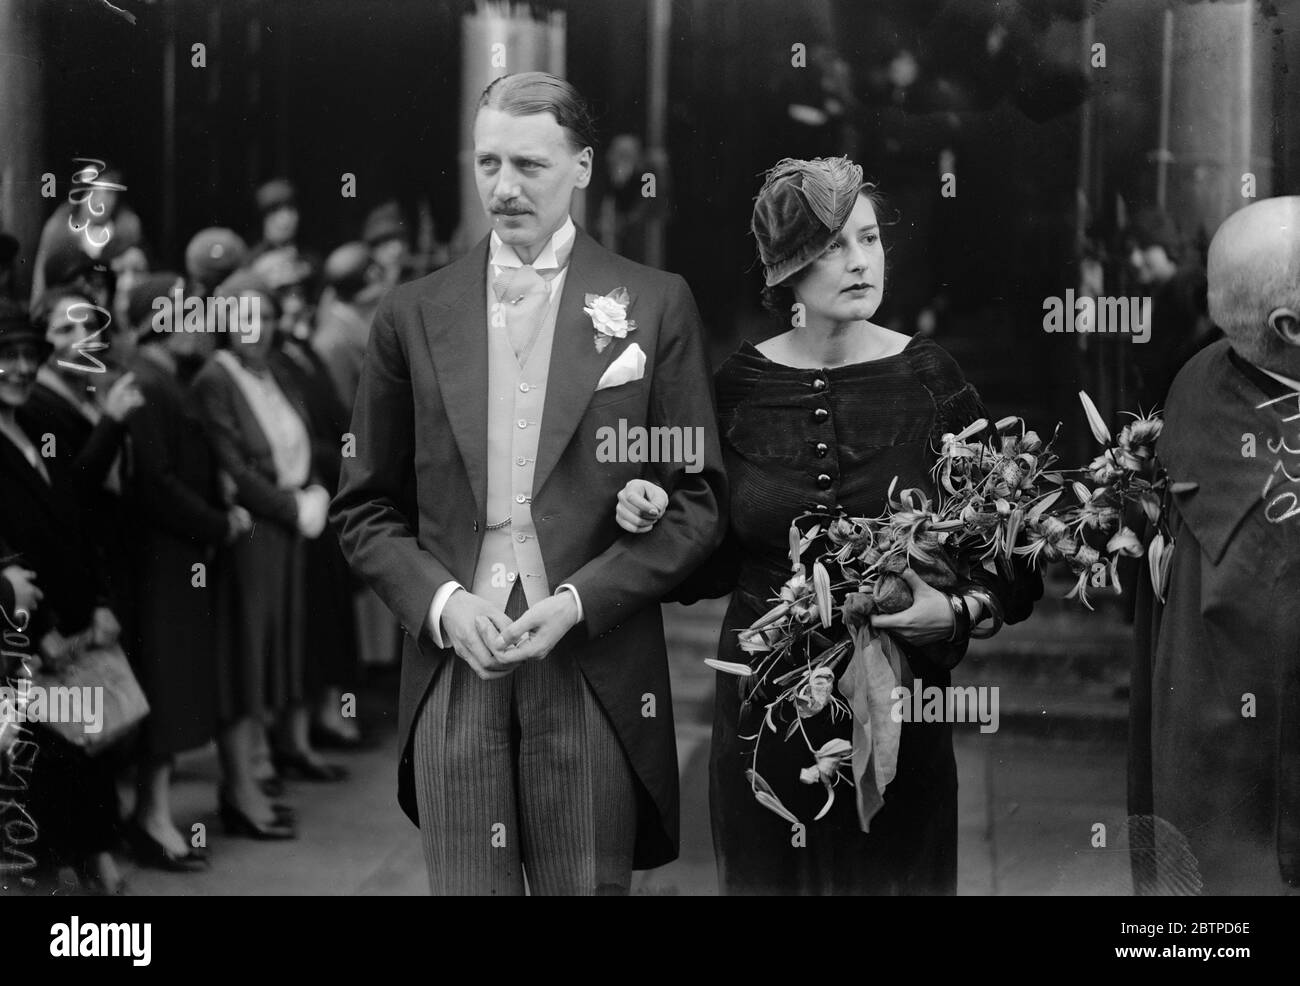 Baron weds . The marriage between Baron Stackelberg and Mme Madeleine Soldatenkov at St Columba 's , Pont Street . Bride and bridegroom . 10 October 1933 Stock Photo